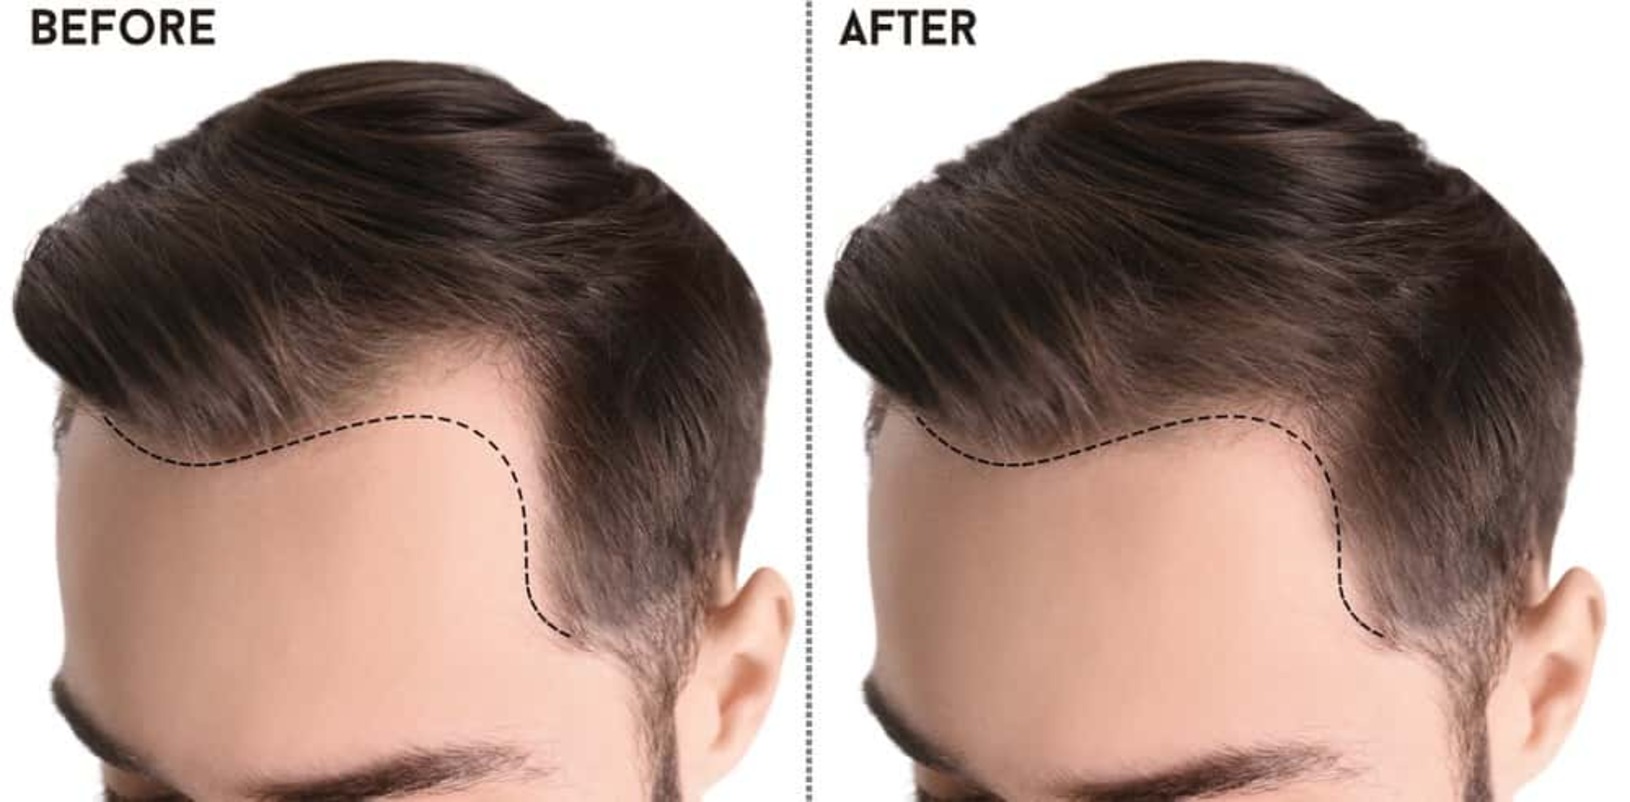 Before & After Hair Transplant Surgery in London | Omniya Clinic